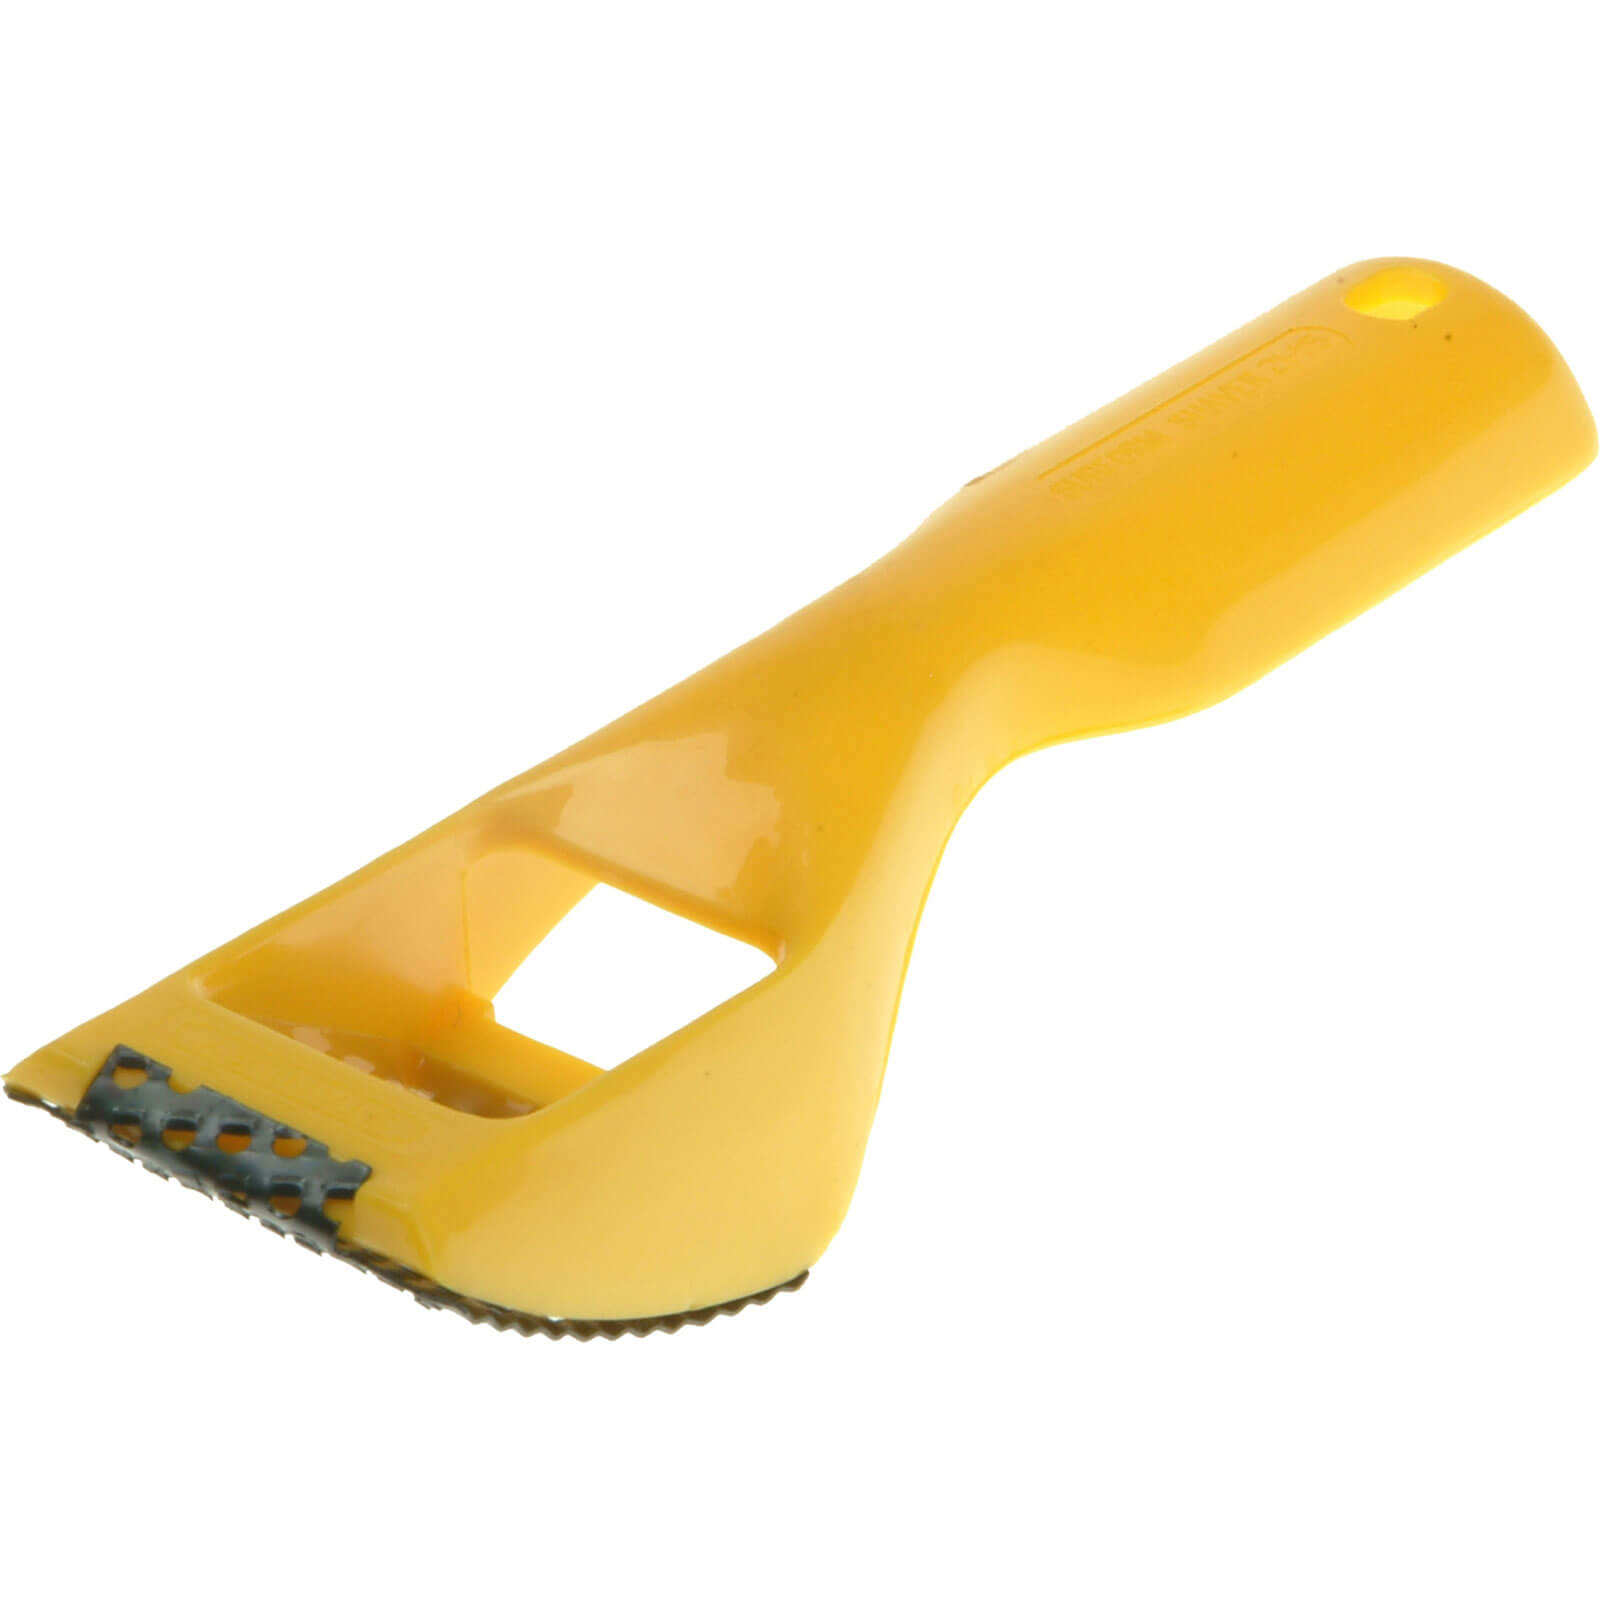 Photo of Stanley Surform Shaver Tool 7